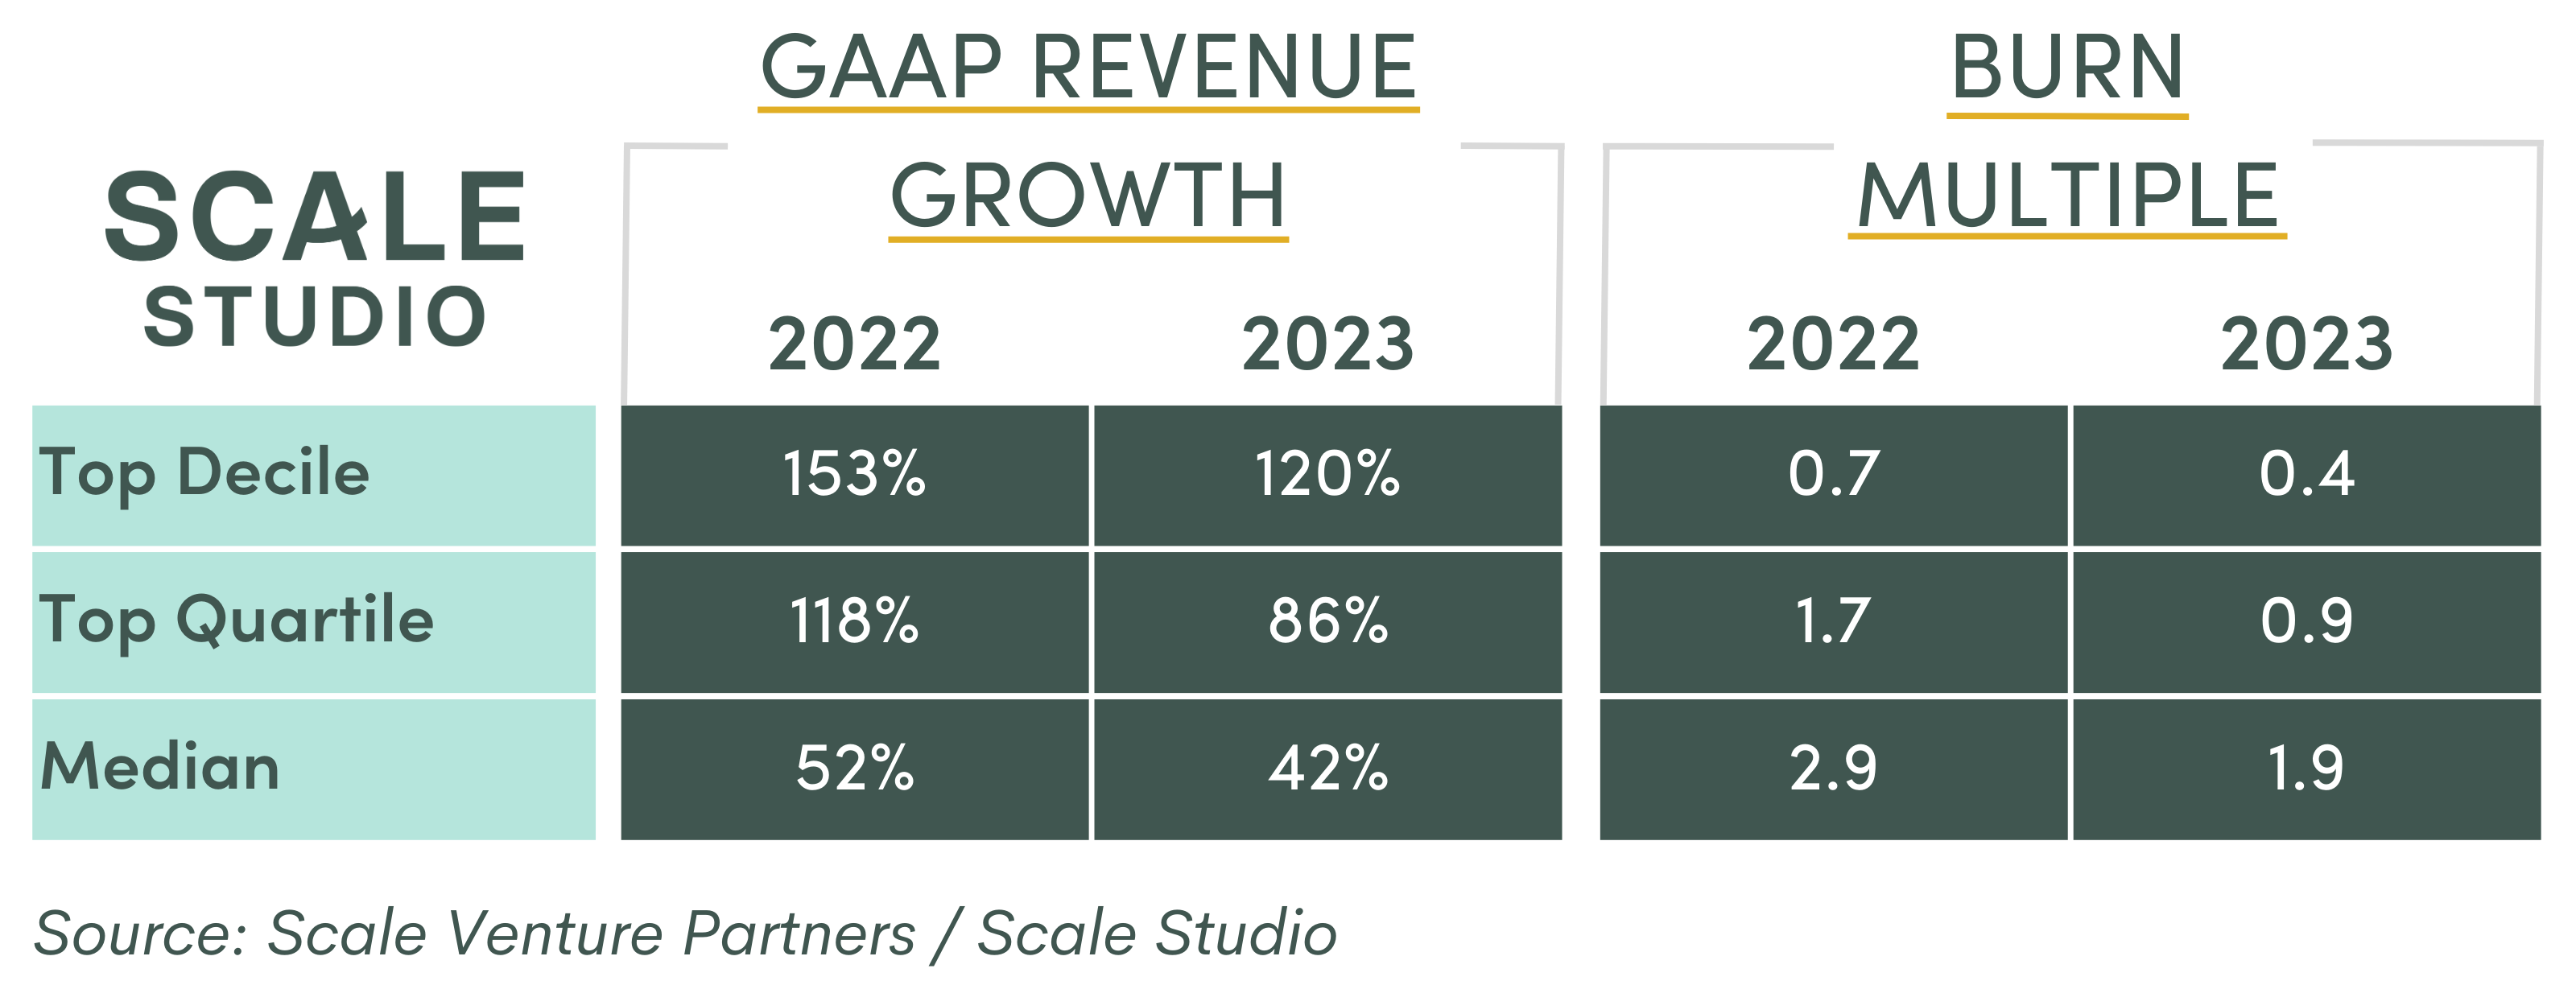 Chart showing GAAP Revenue Growth and Burn Multiple for 2022 and 2023